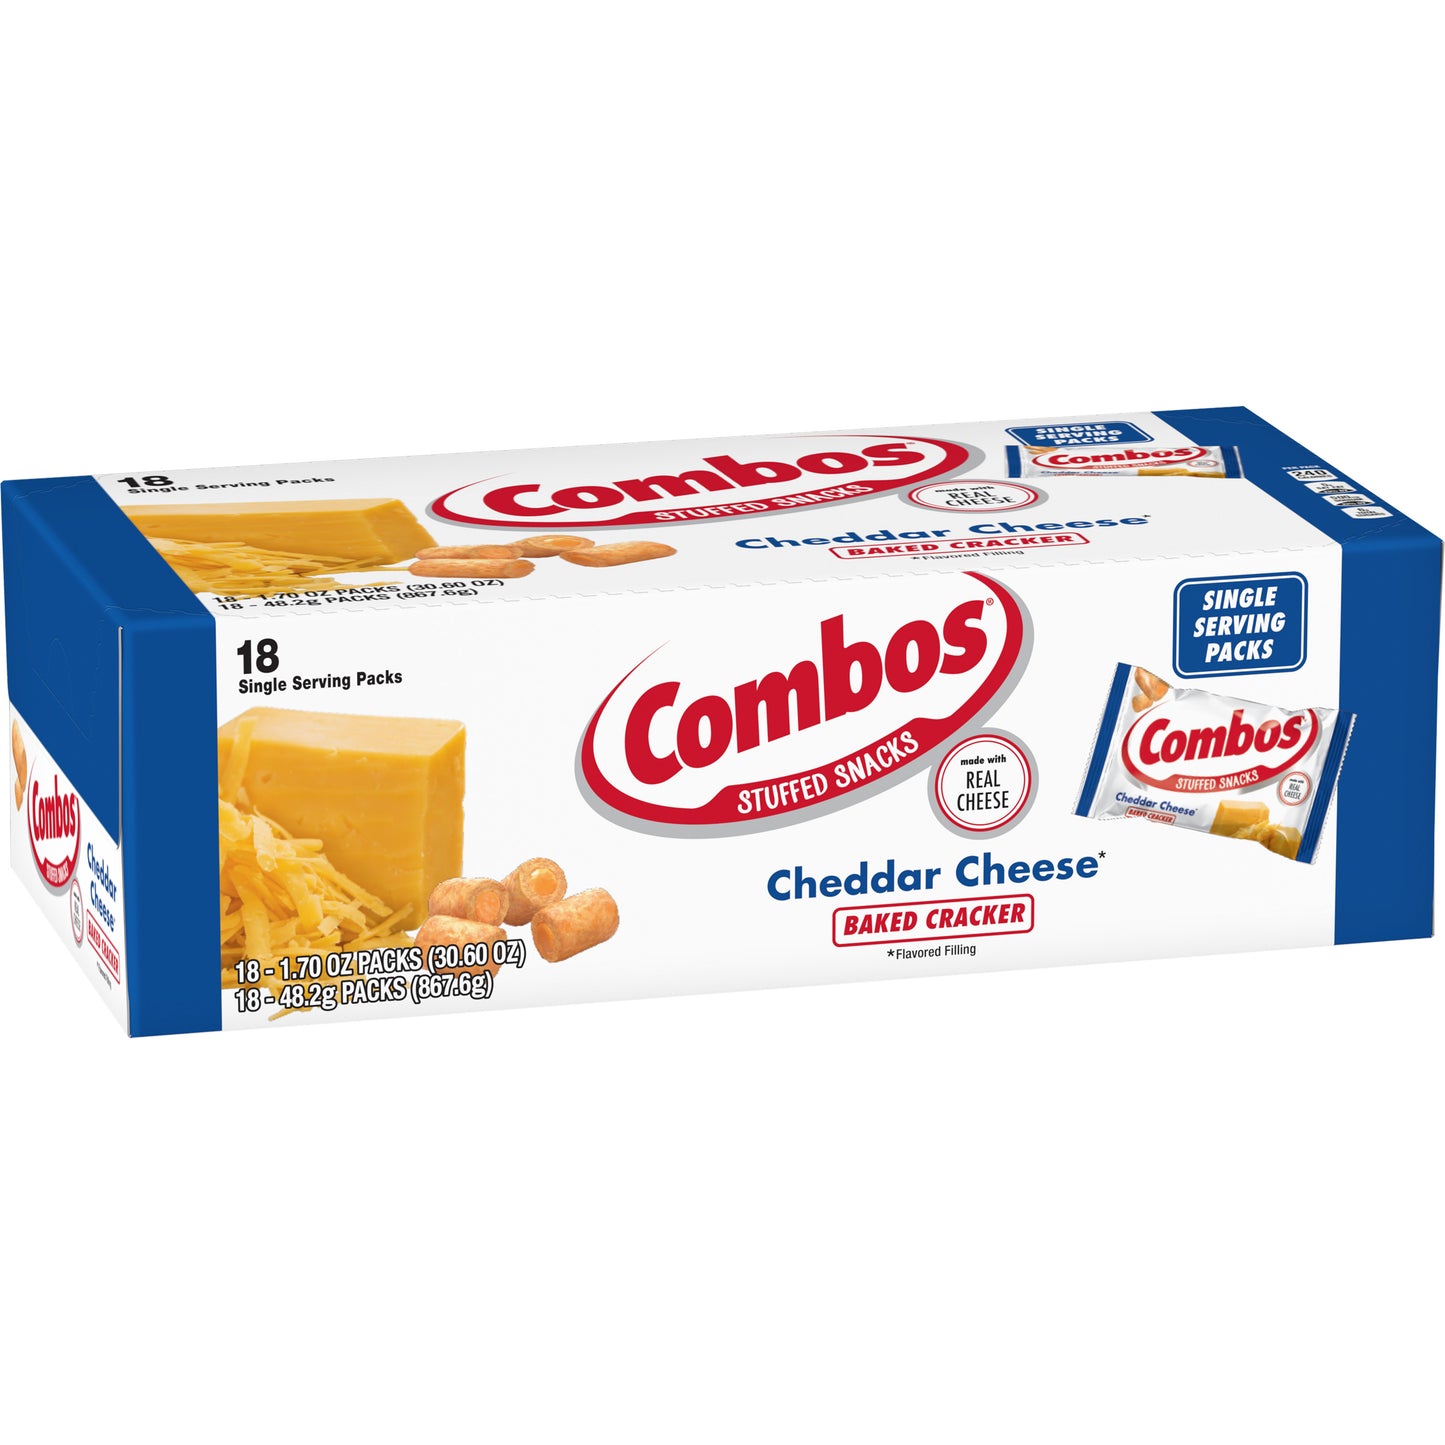 Cheddar Cheese Combos